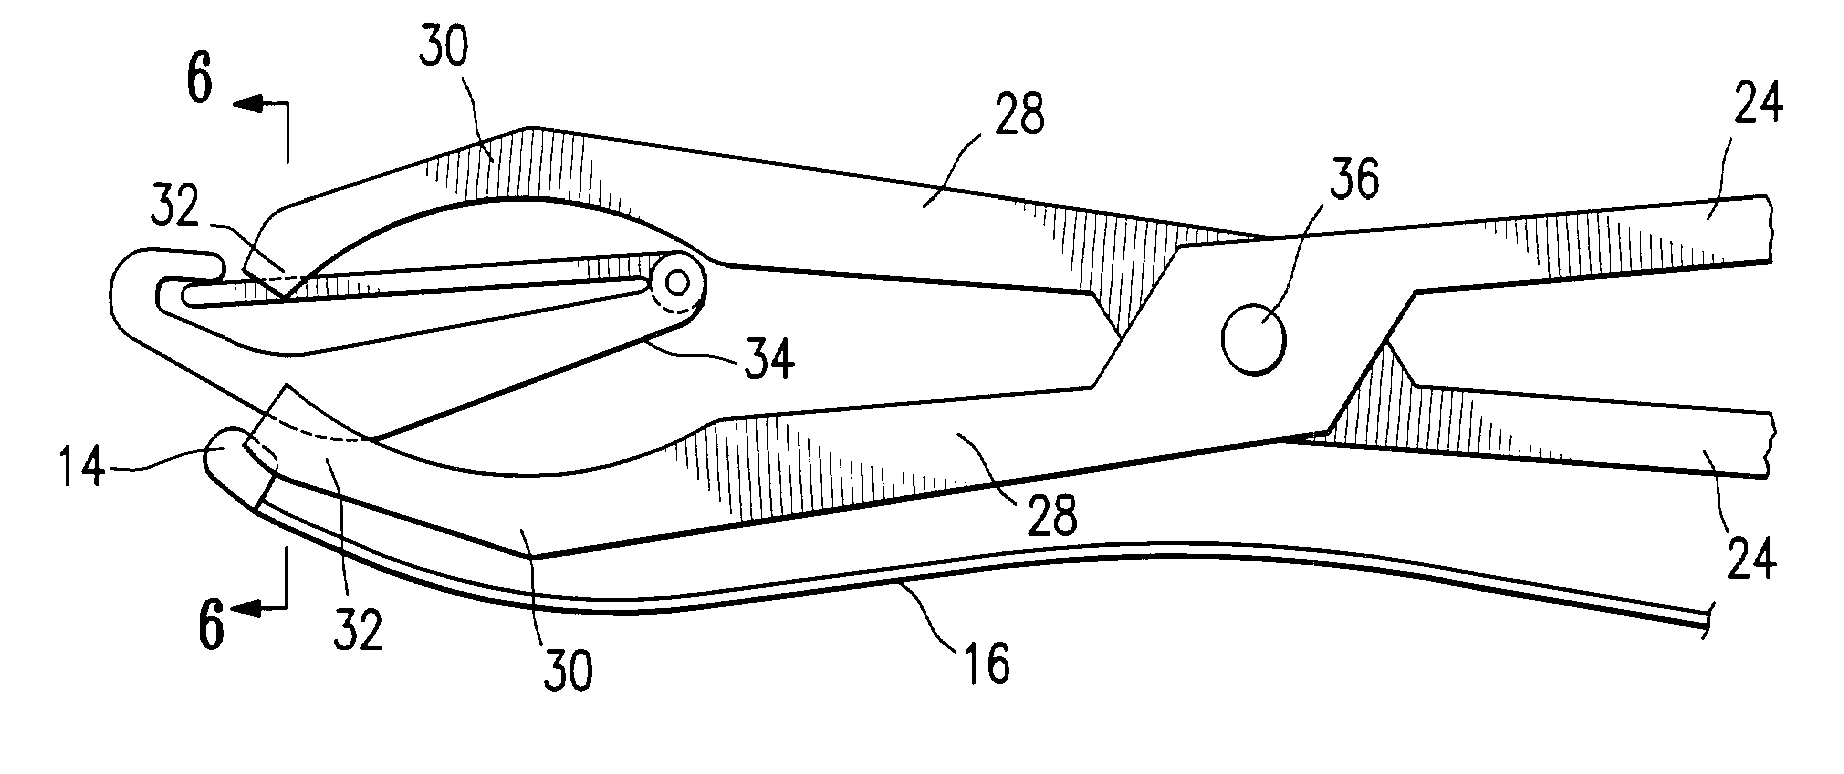 Luminal clip applicator with sensor and methods for occluding body lumens